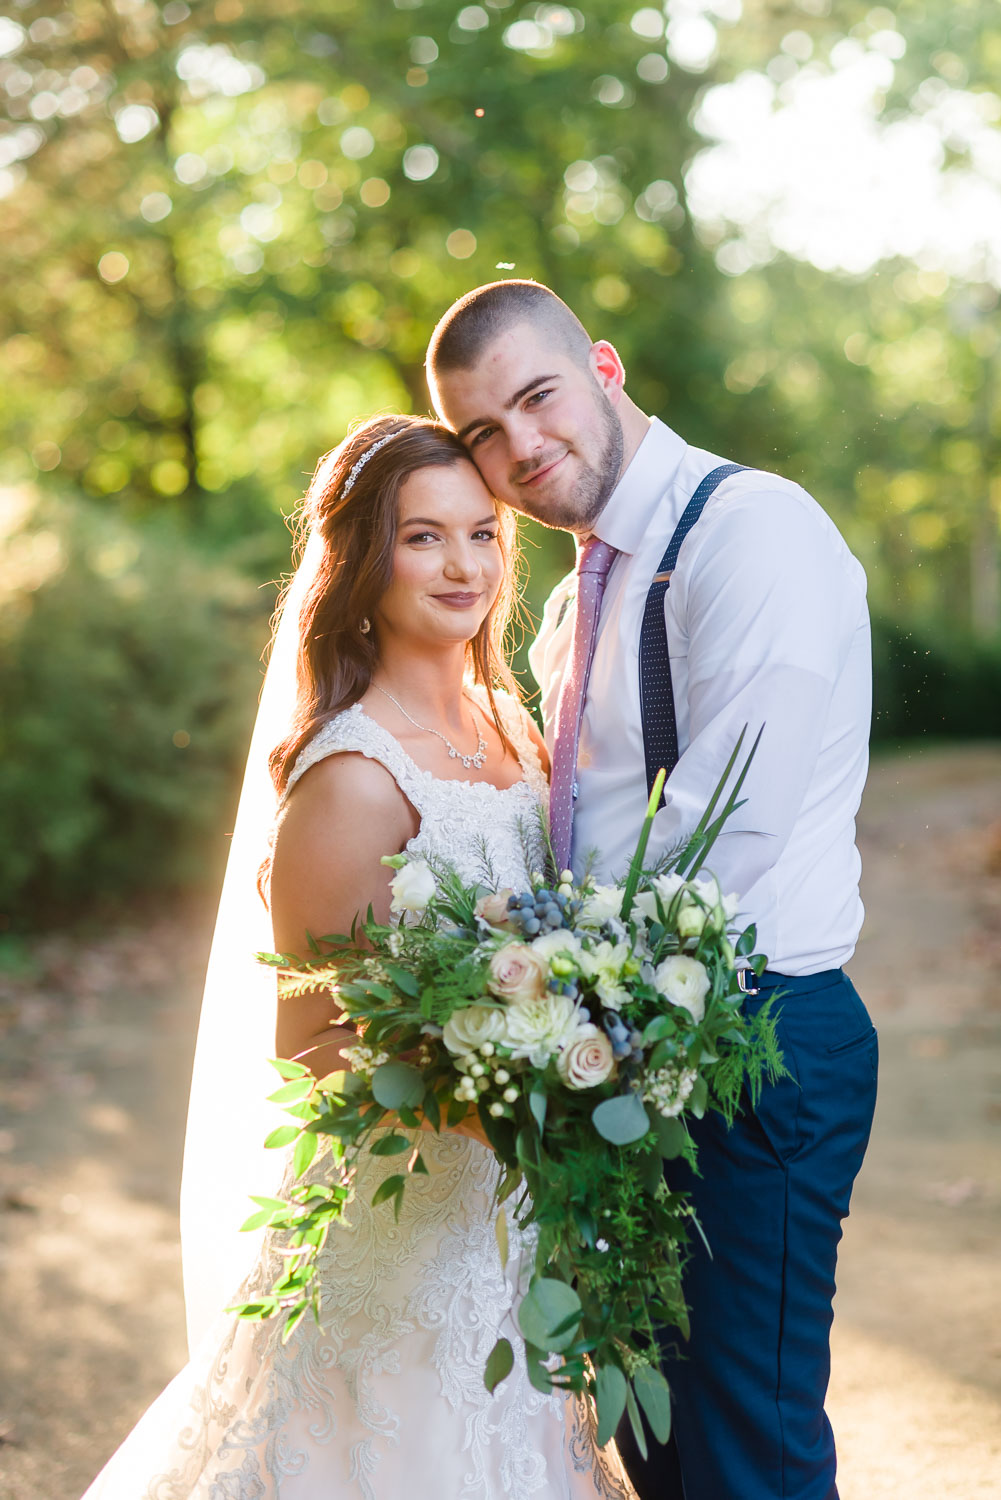 Right in the middle of the road was the best Outside locations for bride and groom portraits with golden sunlight in North Knoxville TN